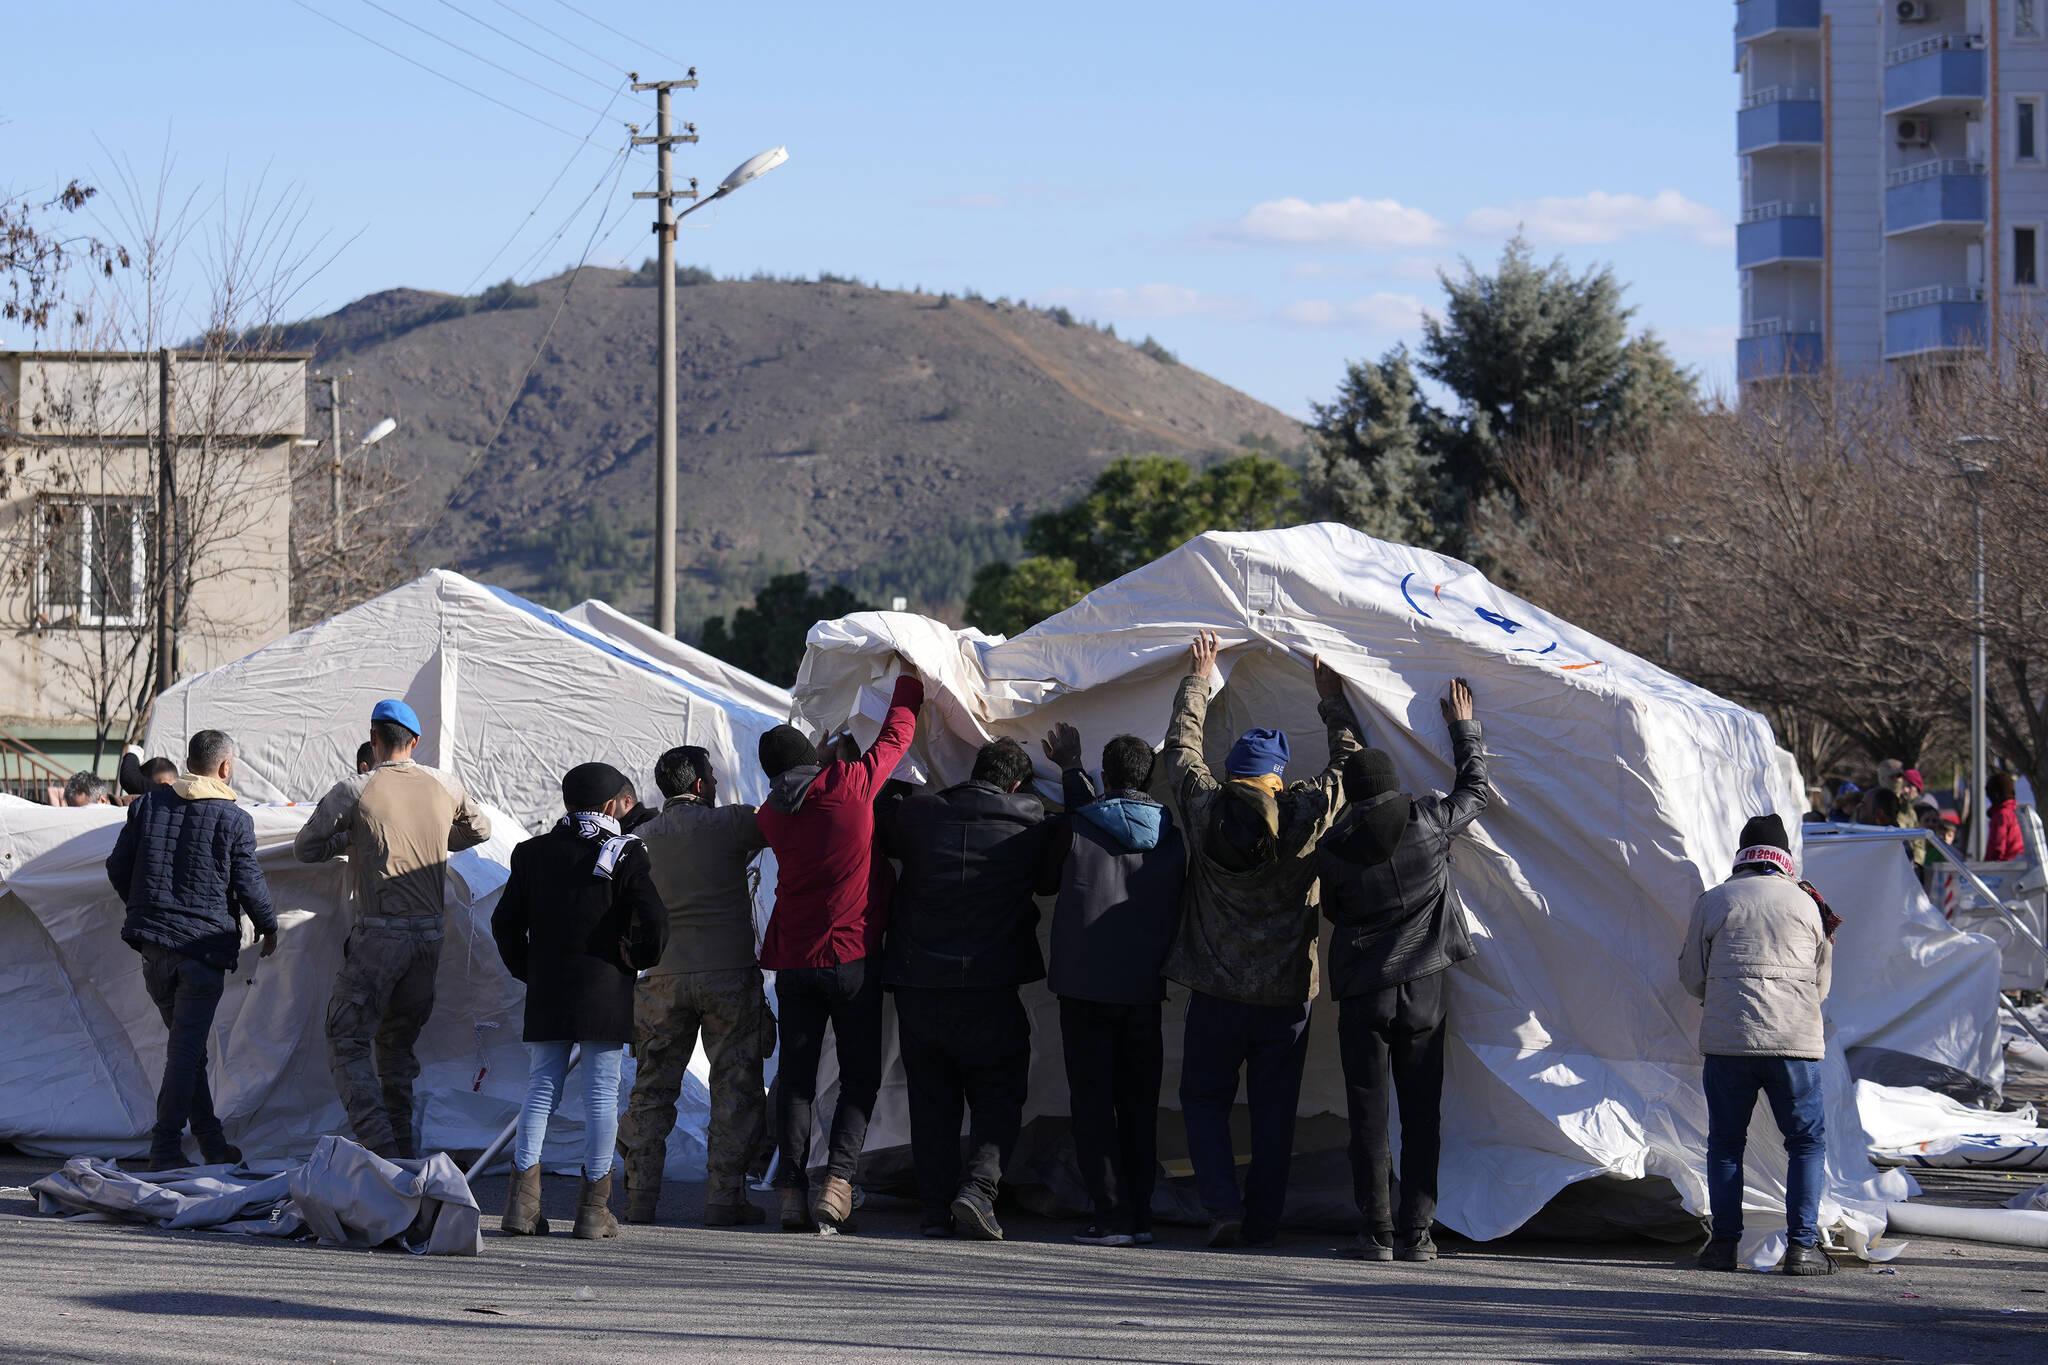 Soldiers and local residents are set up a tent, in Aslanli, southeastern Turkey, Thursday, Feb. 9, 2023. Tens of thousands of people who lost their homes in a catastrophic earthquake huddled around campfires in the bitter cold and clamored for food and water Thursday, three days after the temblor hit Turkey and Syria. (AP Photo/Kamran Jebreili)